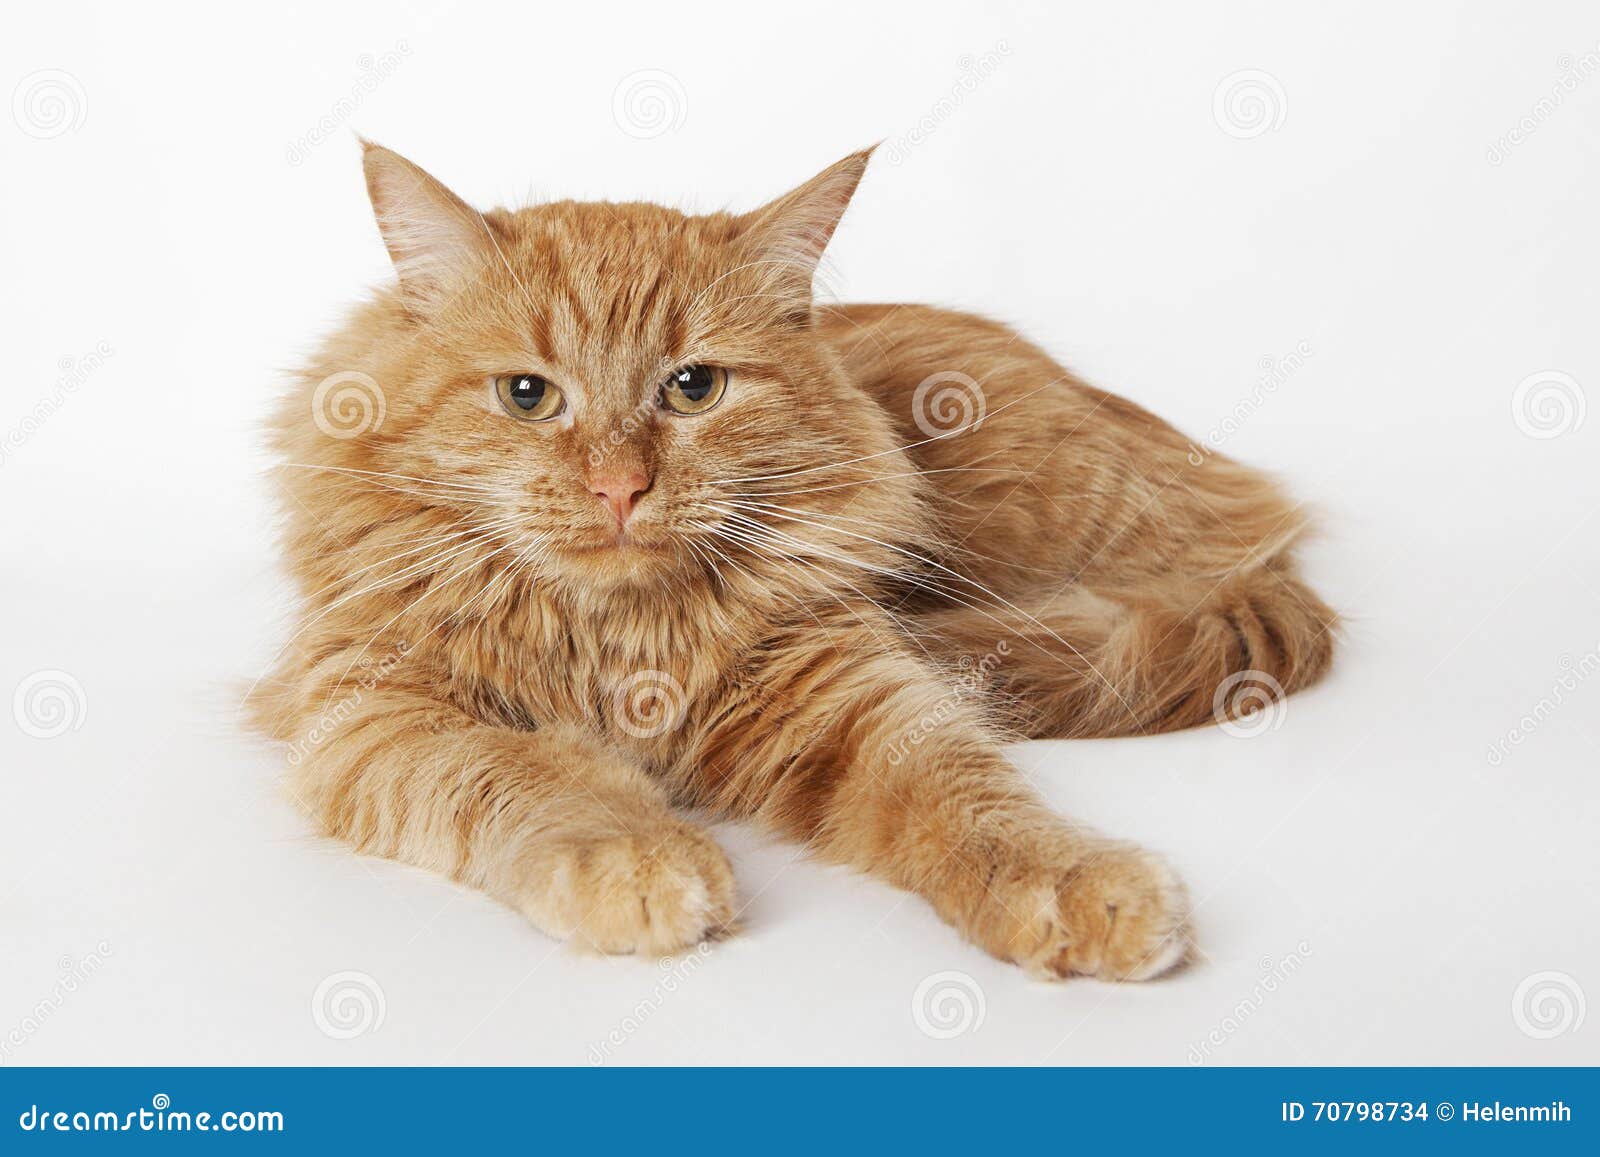 Red-haired cat stock photo. Image of yellow, sleeping - 70798734